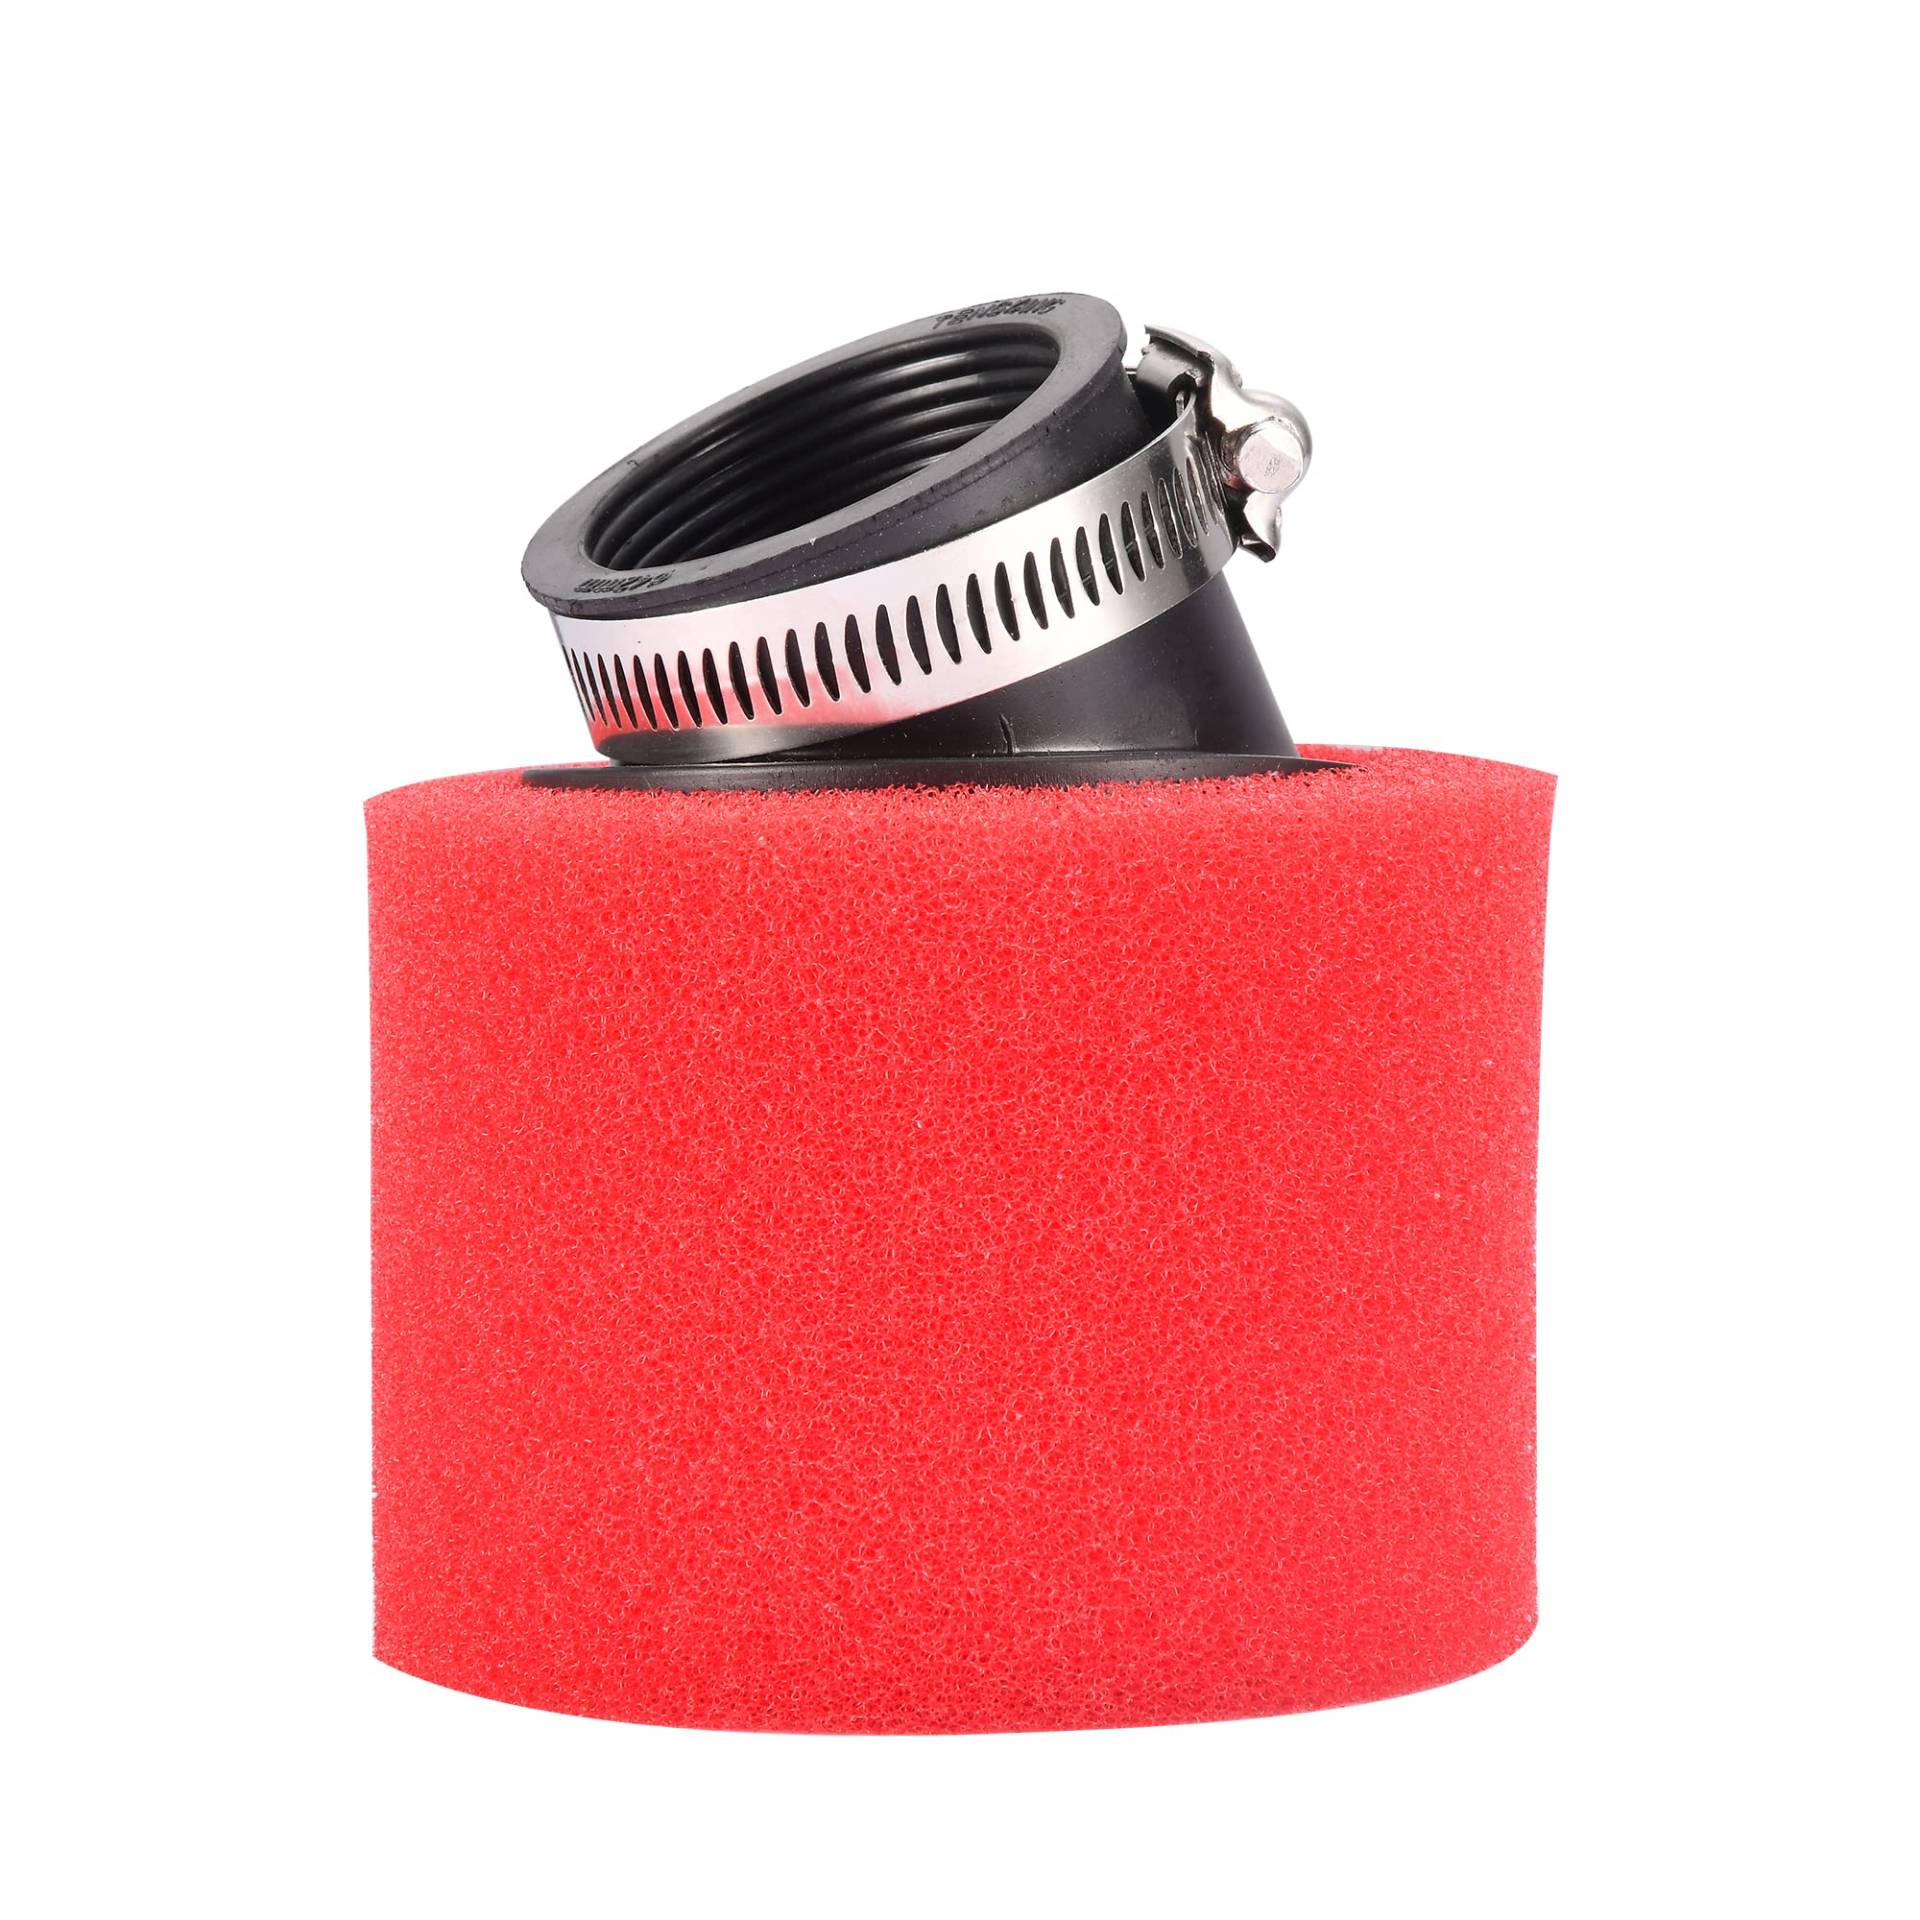 RUTU 42mm Air Filter High Performance Bent Angled Motorcycle Foam Air Filter Suitable with 4 Stroke 50cc 70cc 90cc 110cc 125cc 150cc GY6 Motorcycle Scooter Quad Go Kart Moped Pit Dirt Bike-Red von RUTU